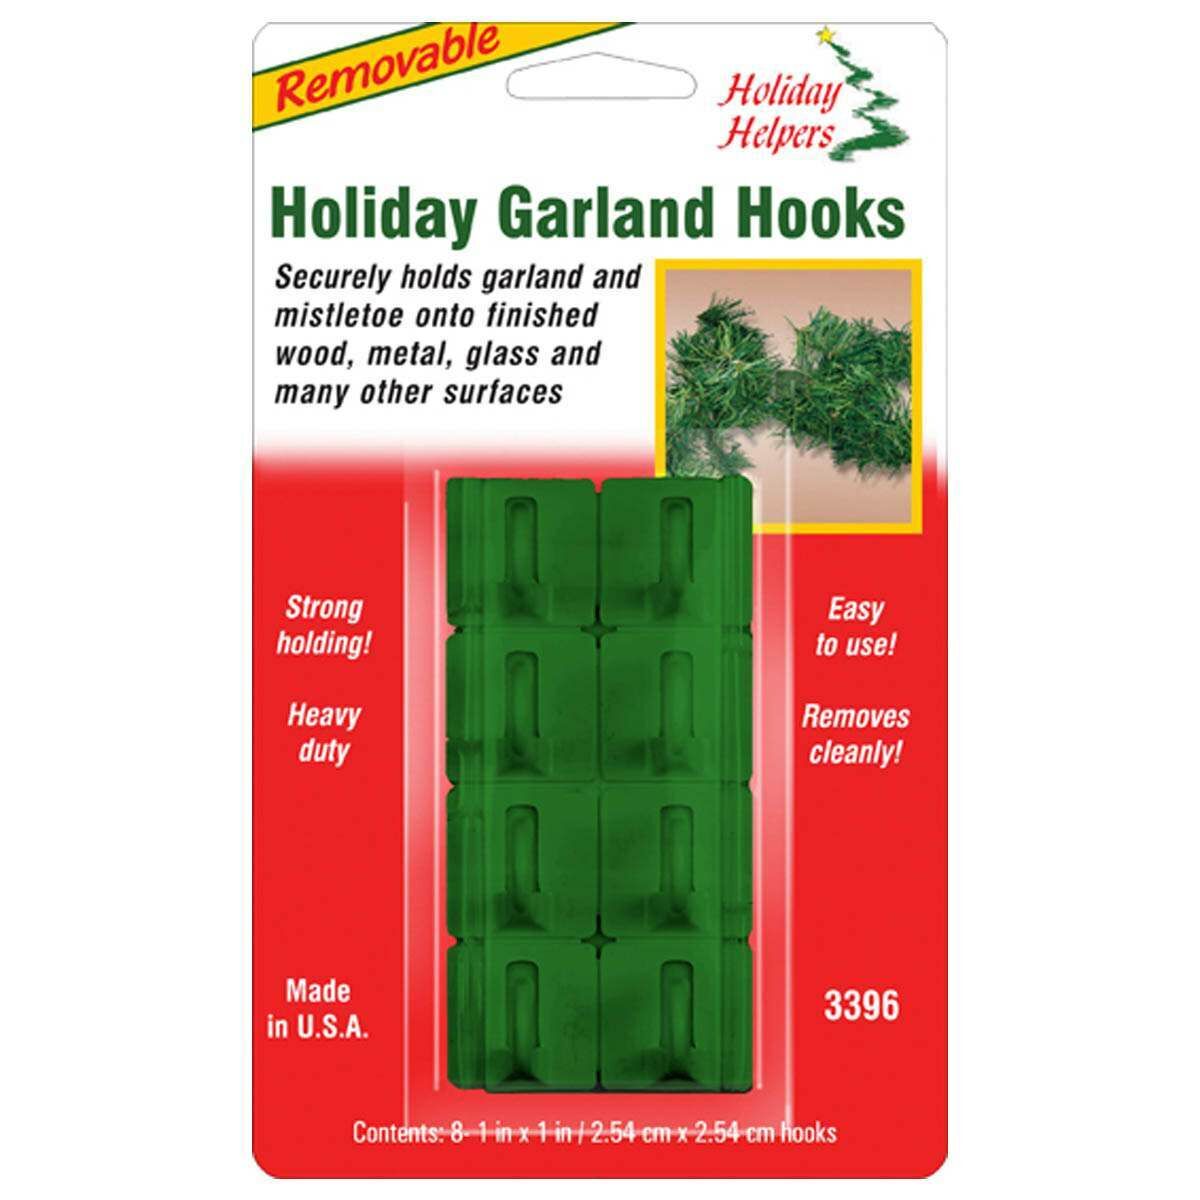 Green Removable Garland Hooks, 8 Pack image 1